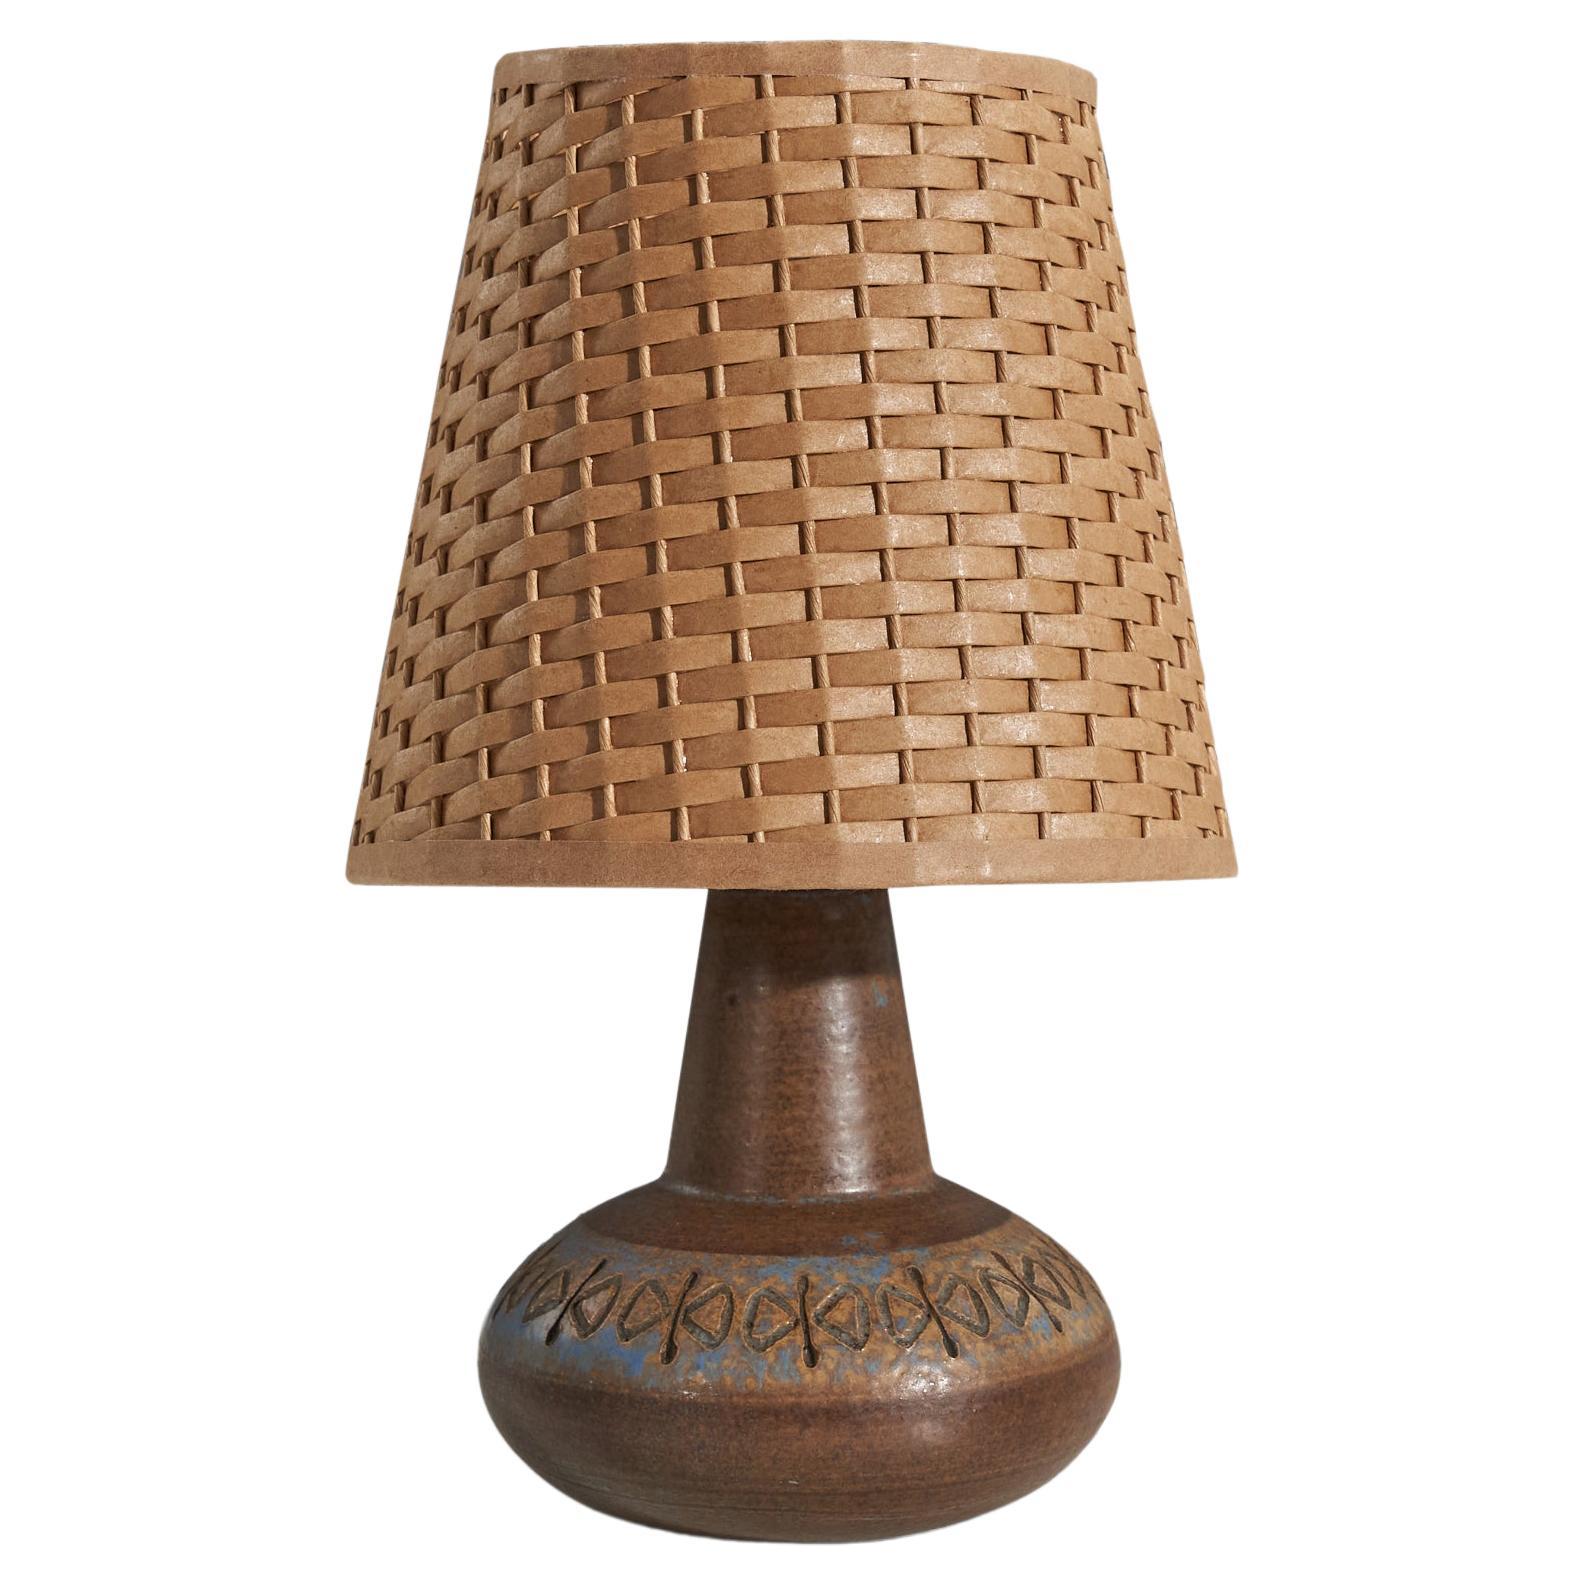 Ulla Winbladh, Brown Table Lamp, Glazed Incised Stoneware, Sweden, 1950s